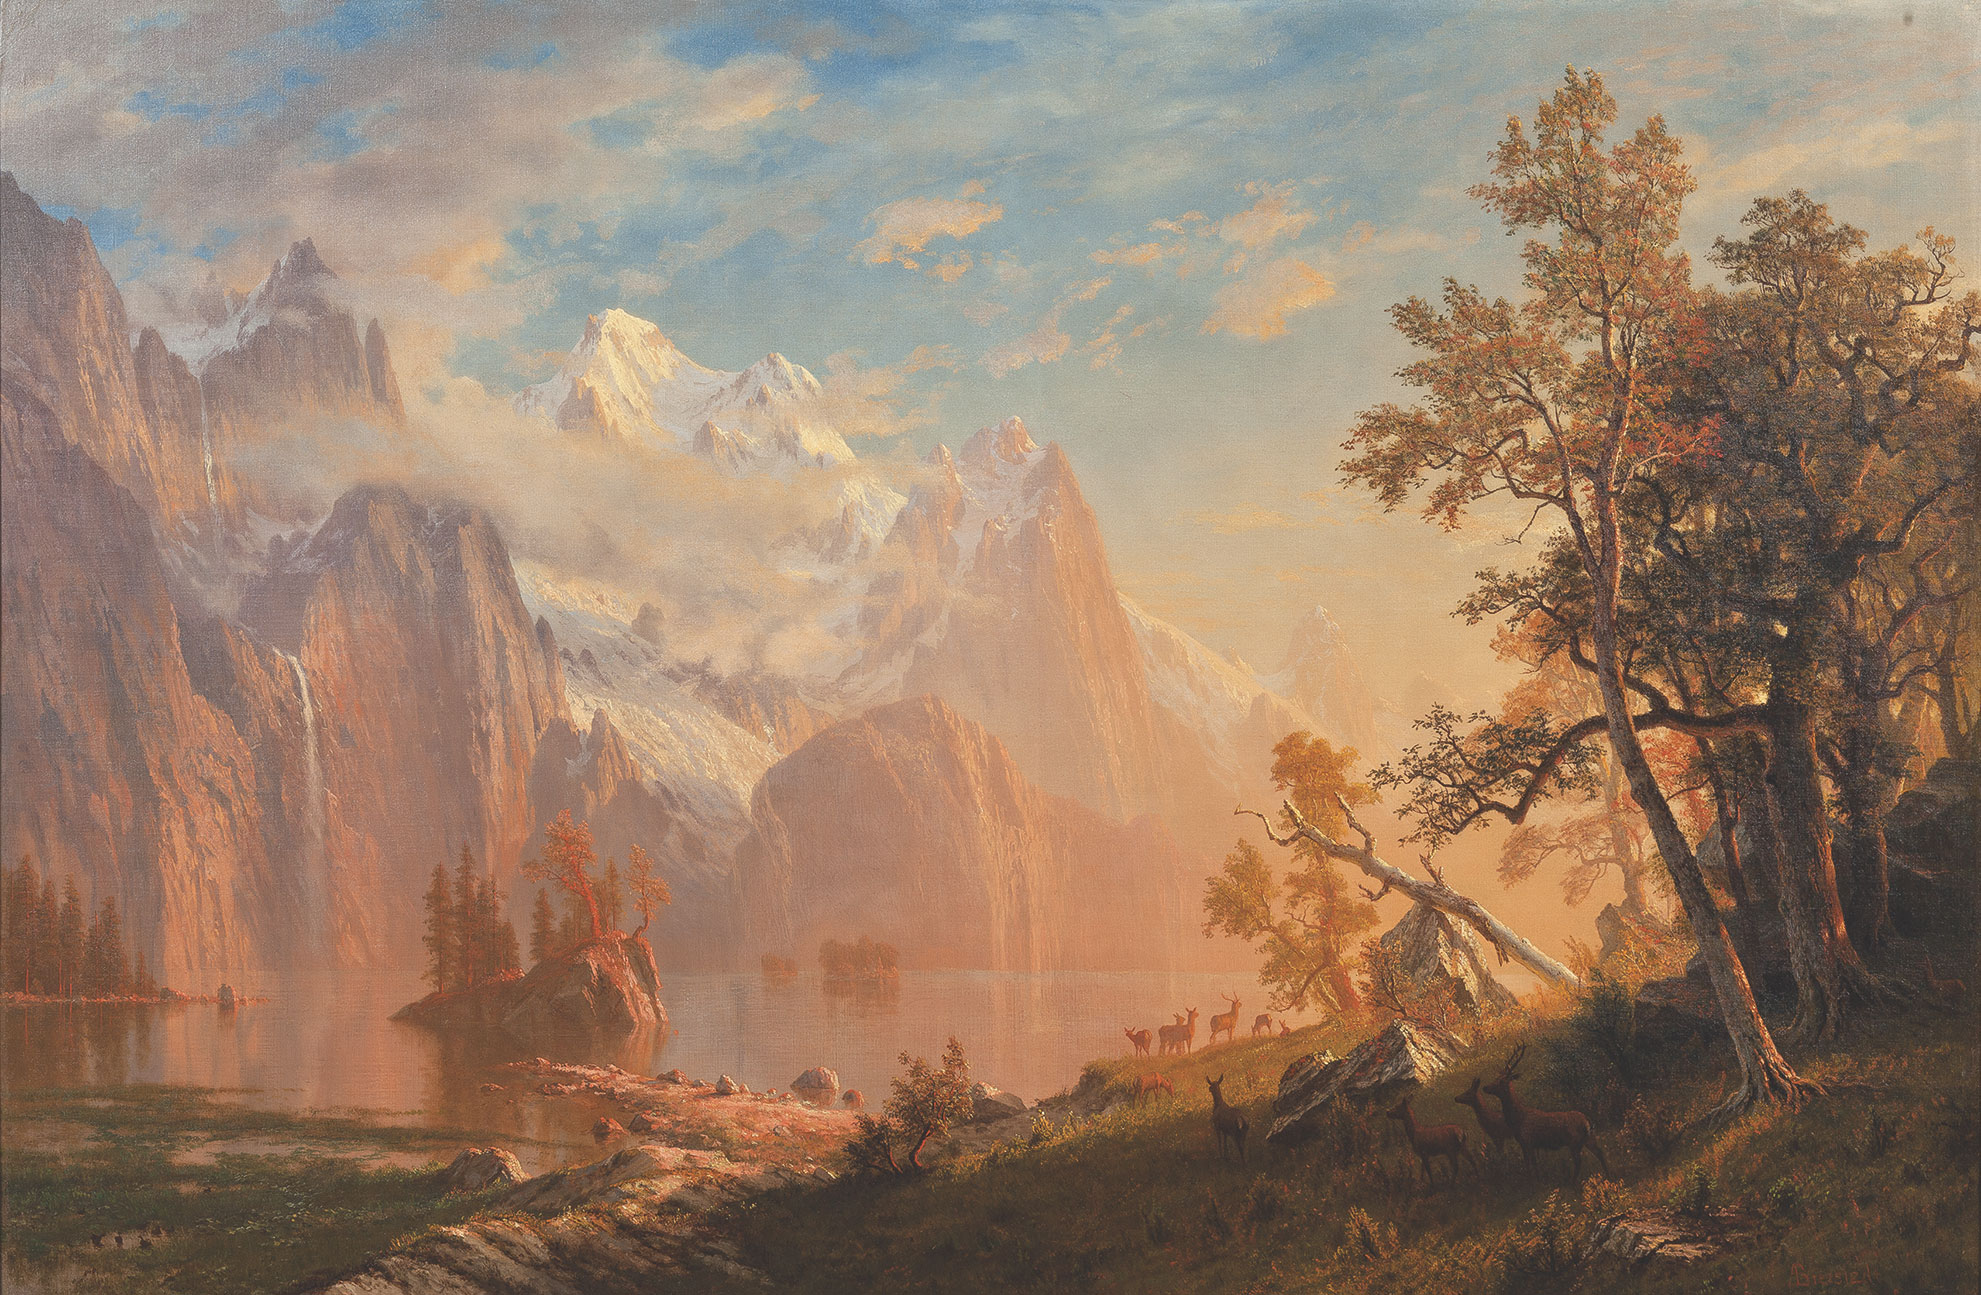 David Perell on X: When it comes to American art, nothing beats the Hudson  River School style. These artists worshipped their landscapes. They were  humbled by the rule of nature and moved